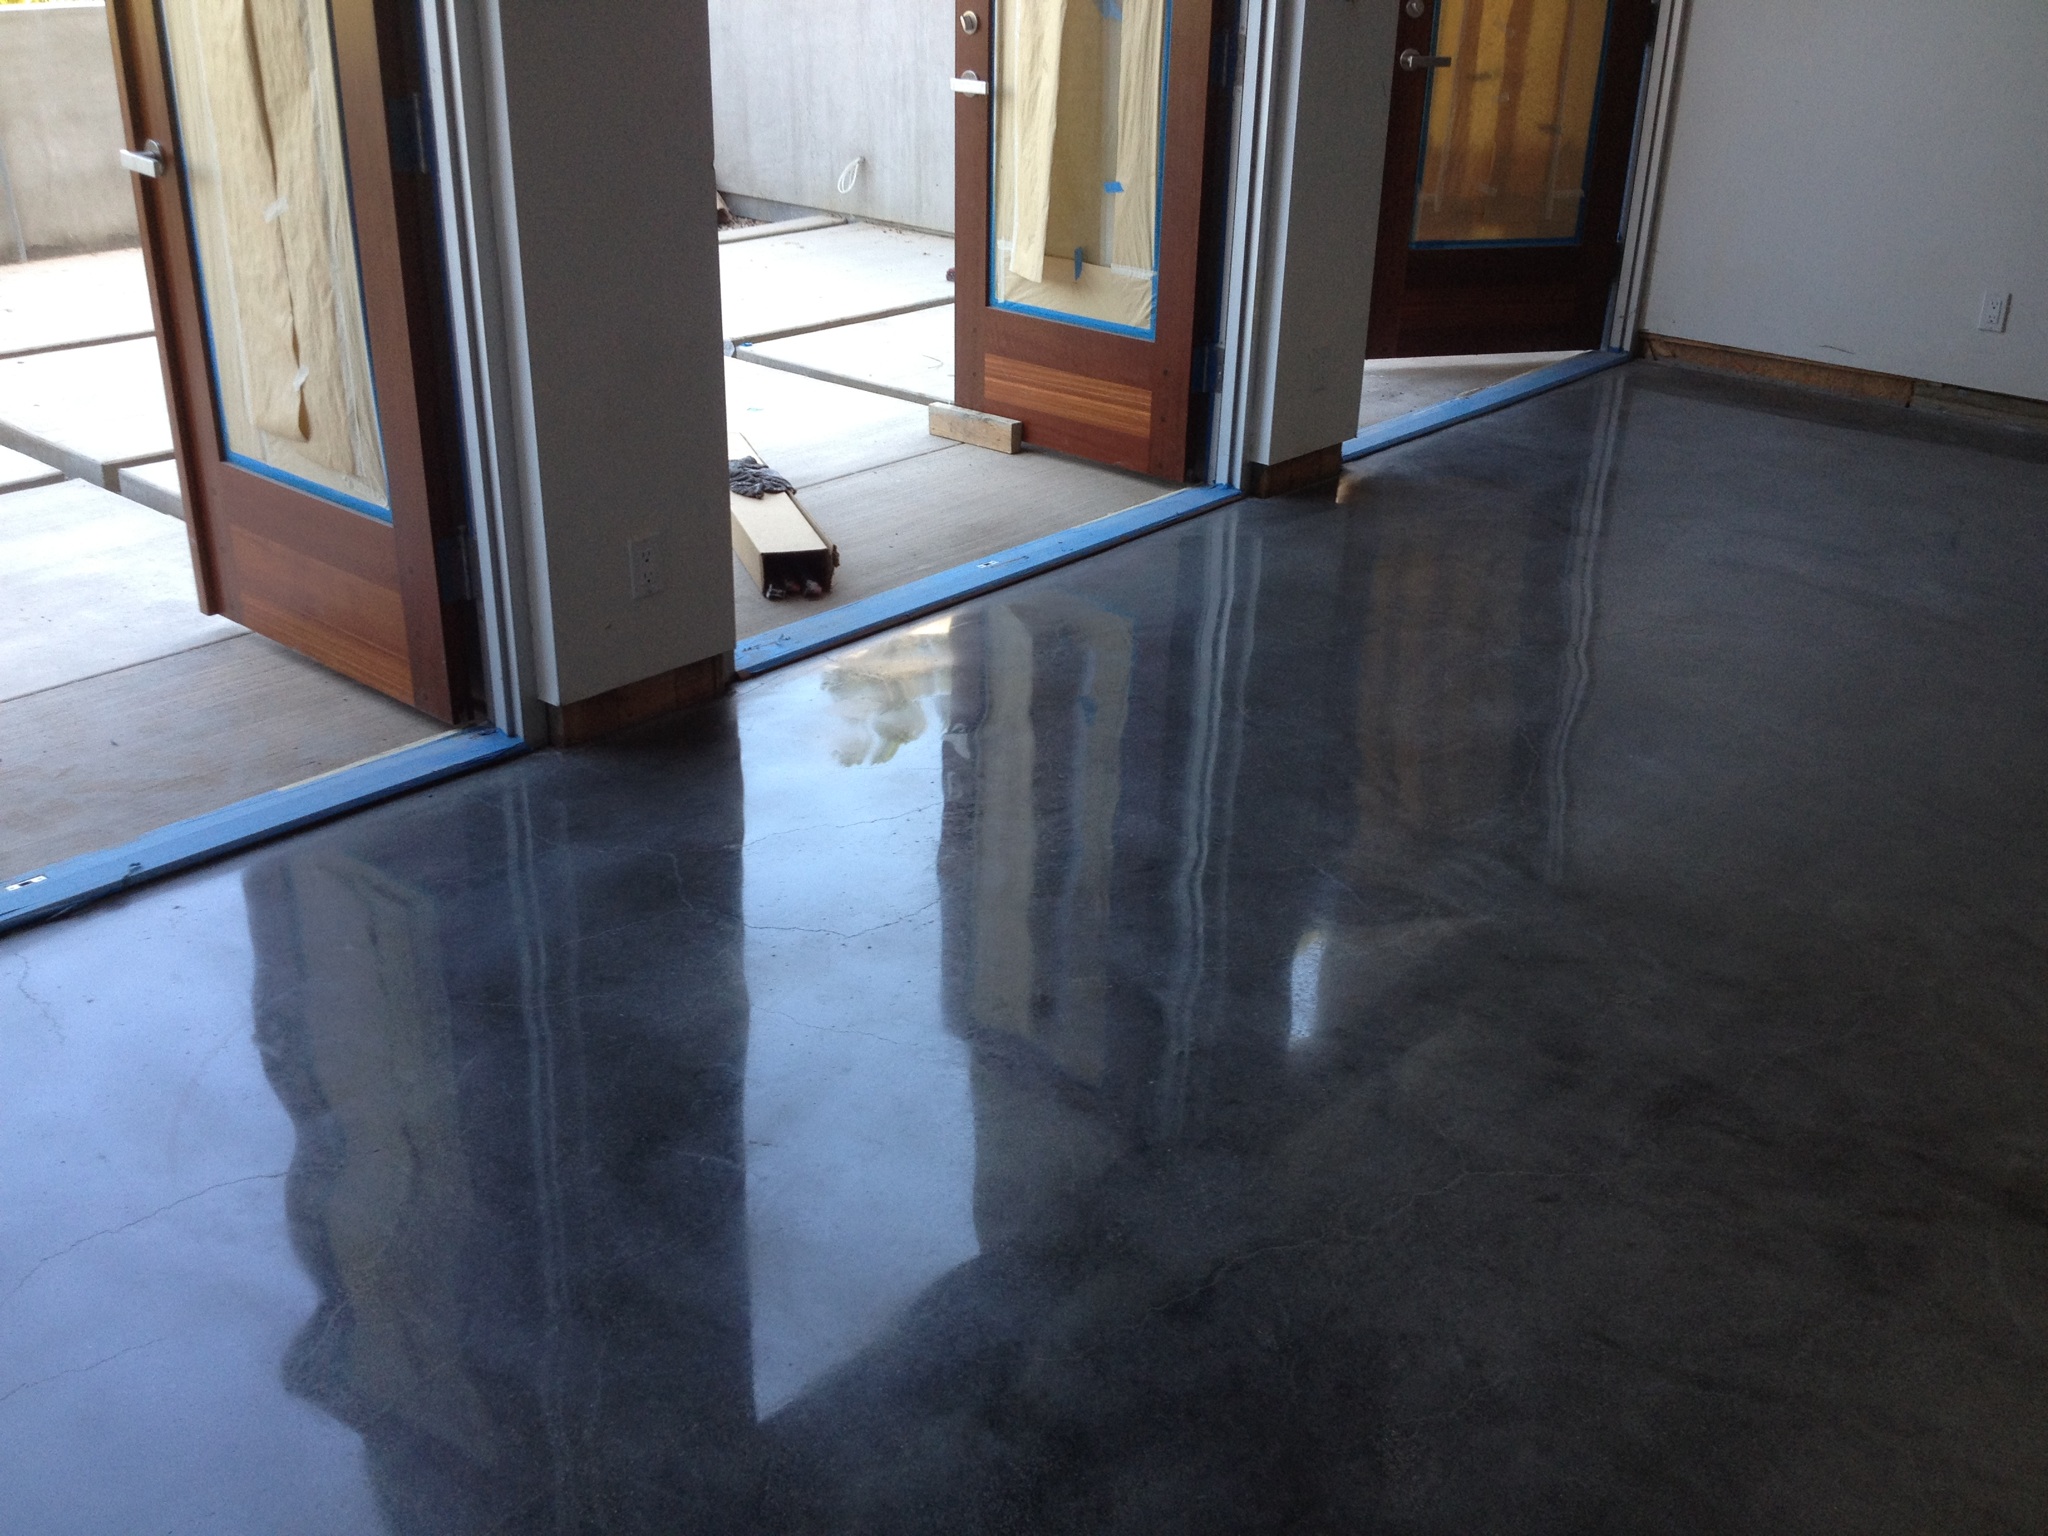 Flooring: Polished Concrete Floors In Grey With Glass Door With Wood ...